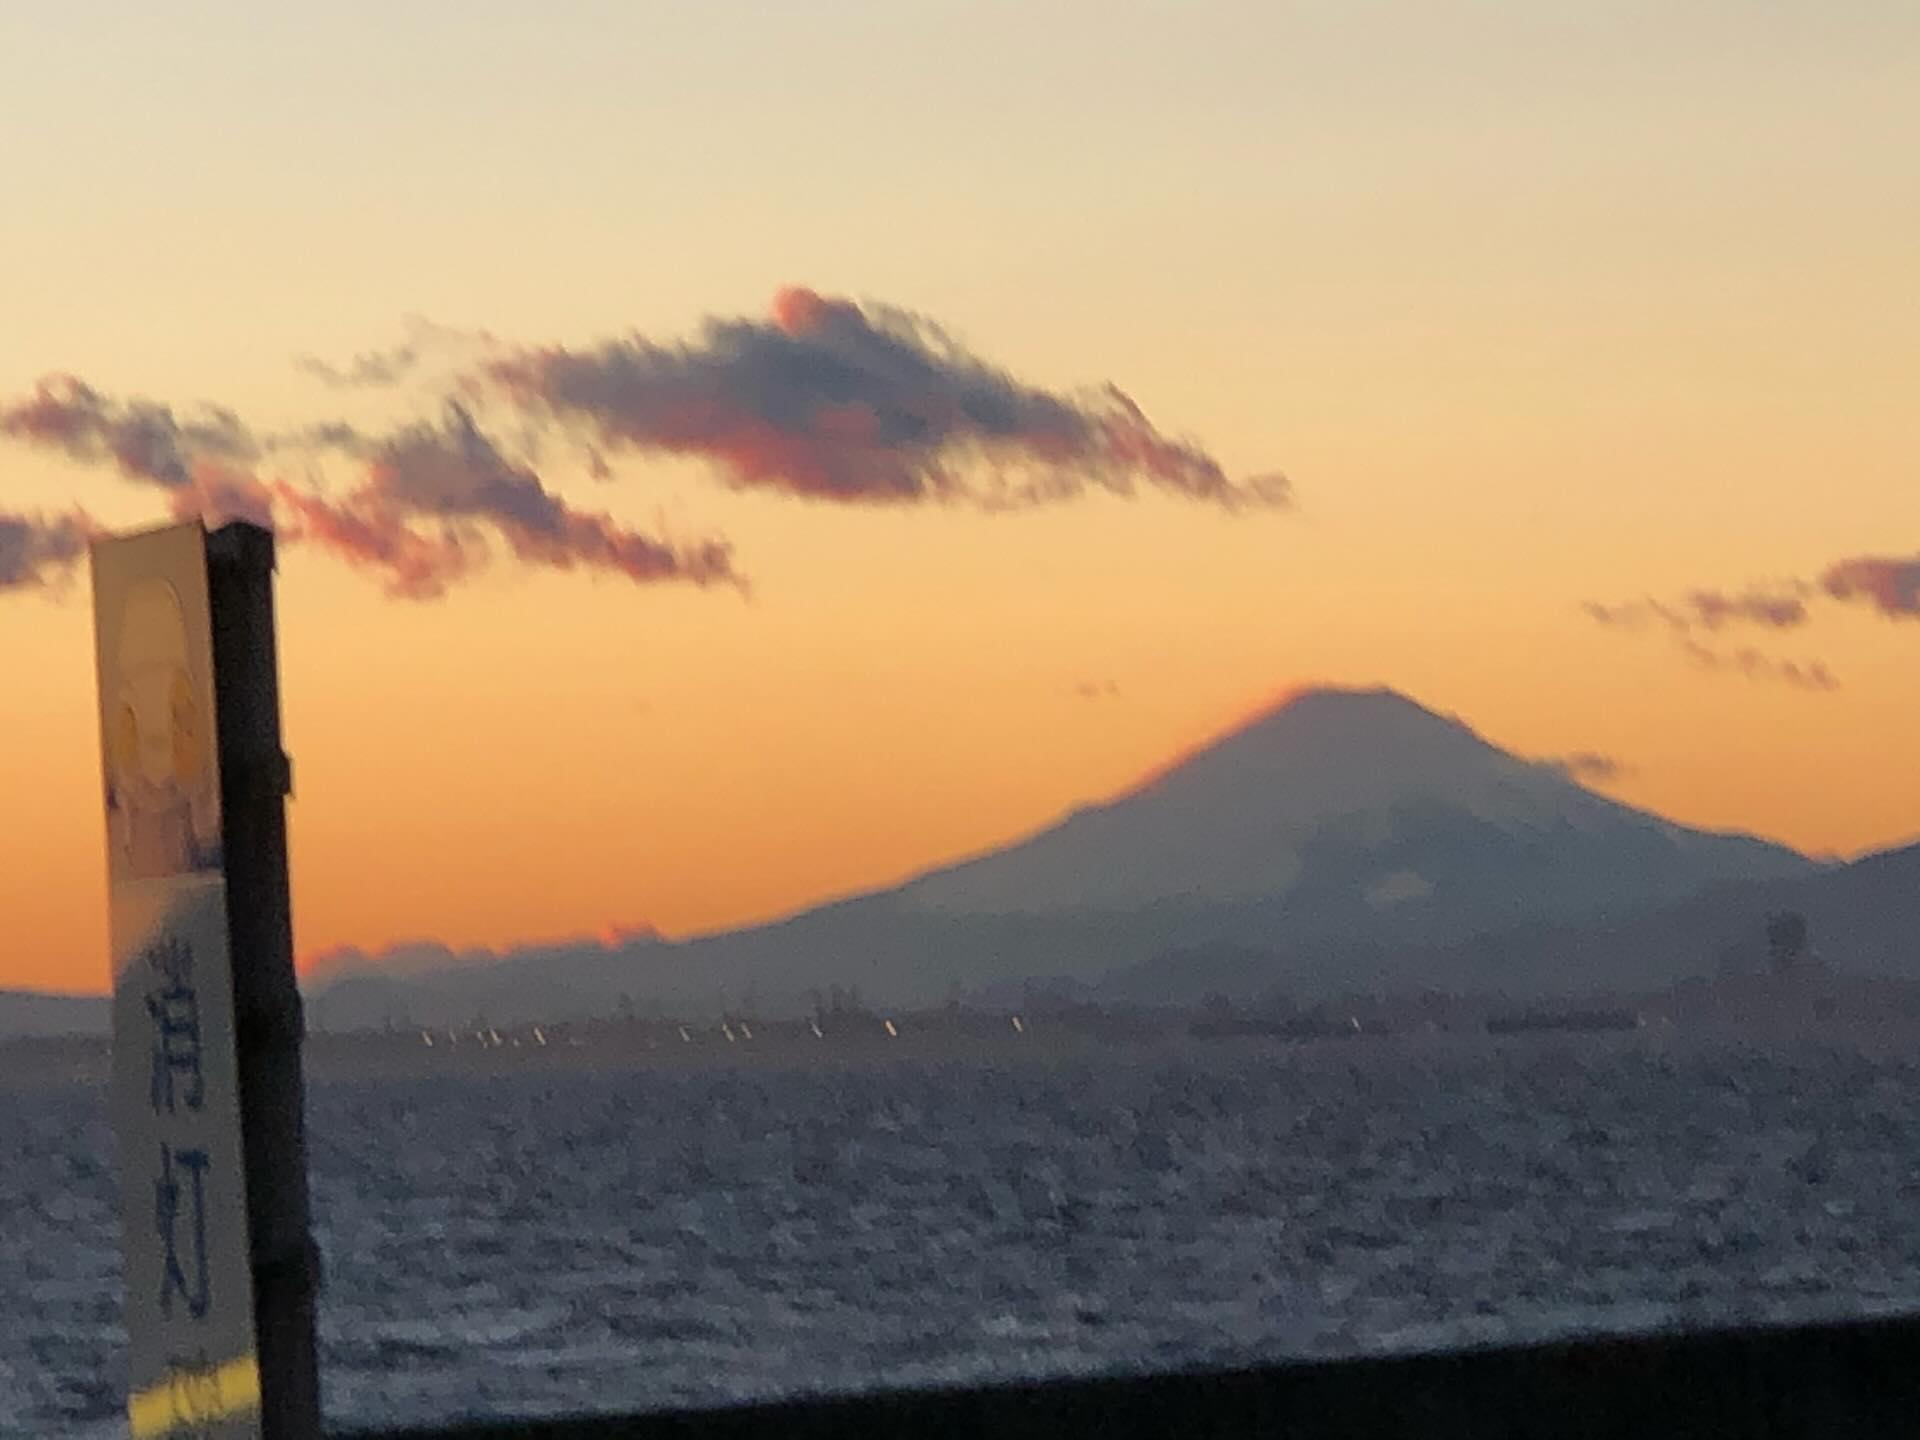 sunset behind Mt Fuji as seen from the Aqua Line Tollway in Japan